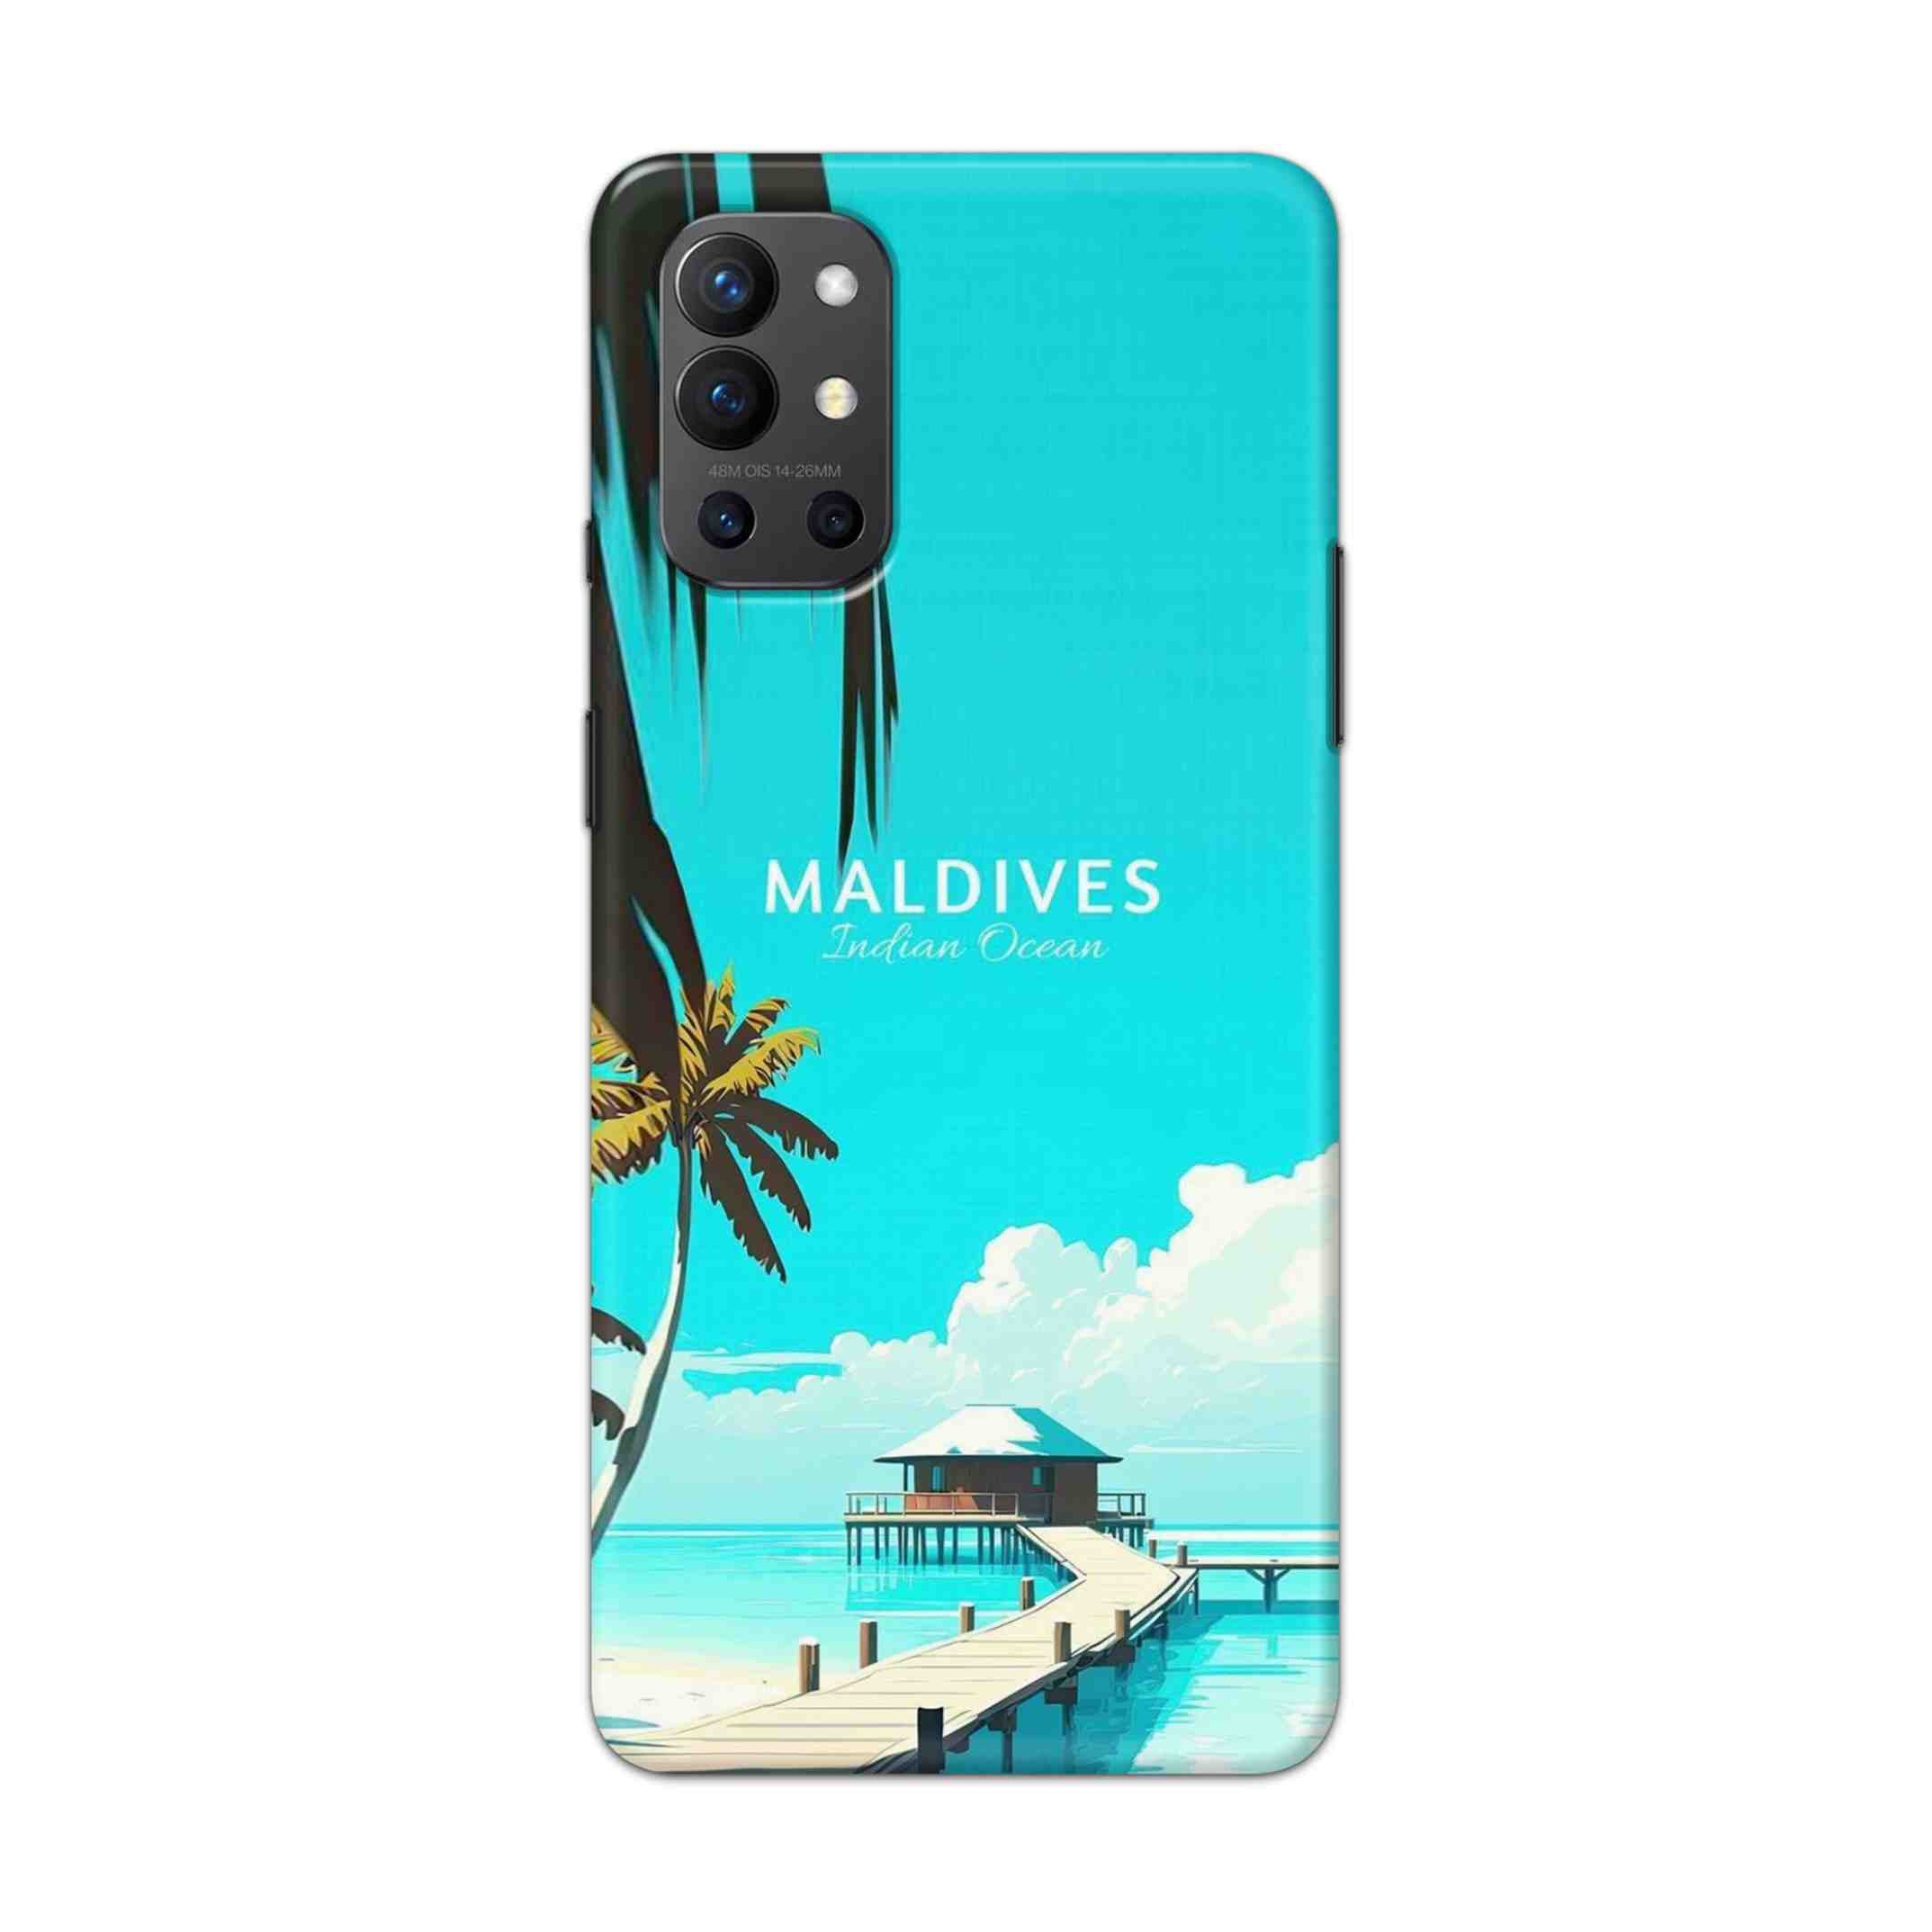 Buy Maldives Hard Back Mobile Phone Case Cover For OnePlus 9R / 8T Online